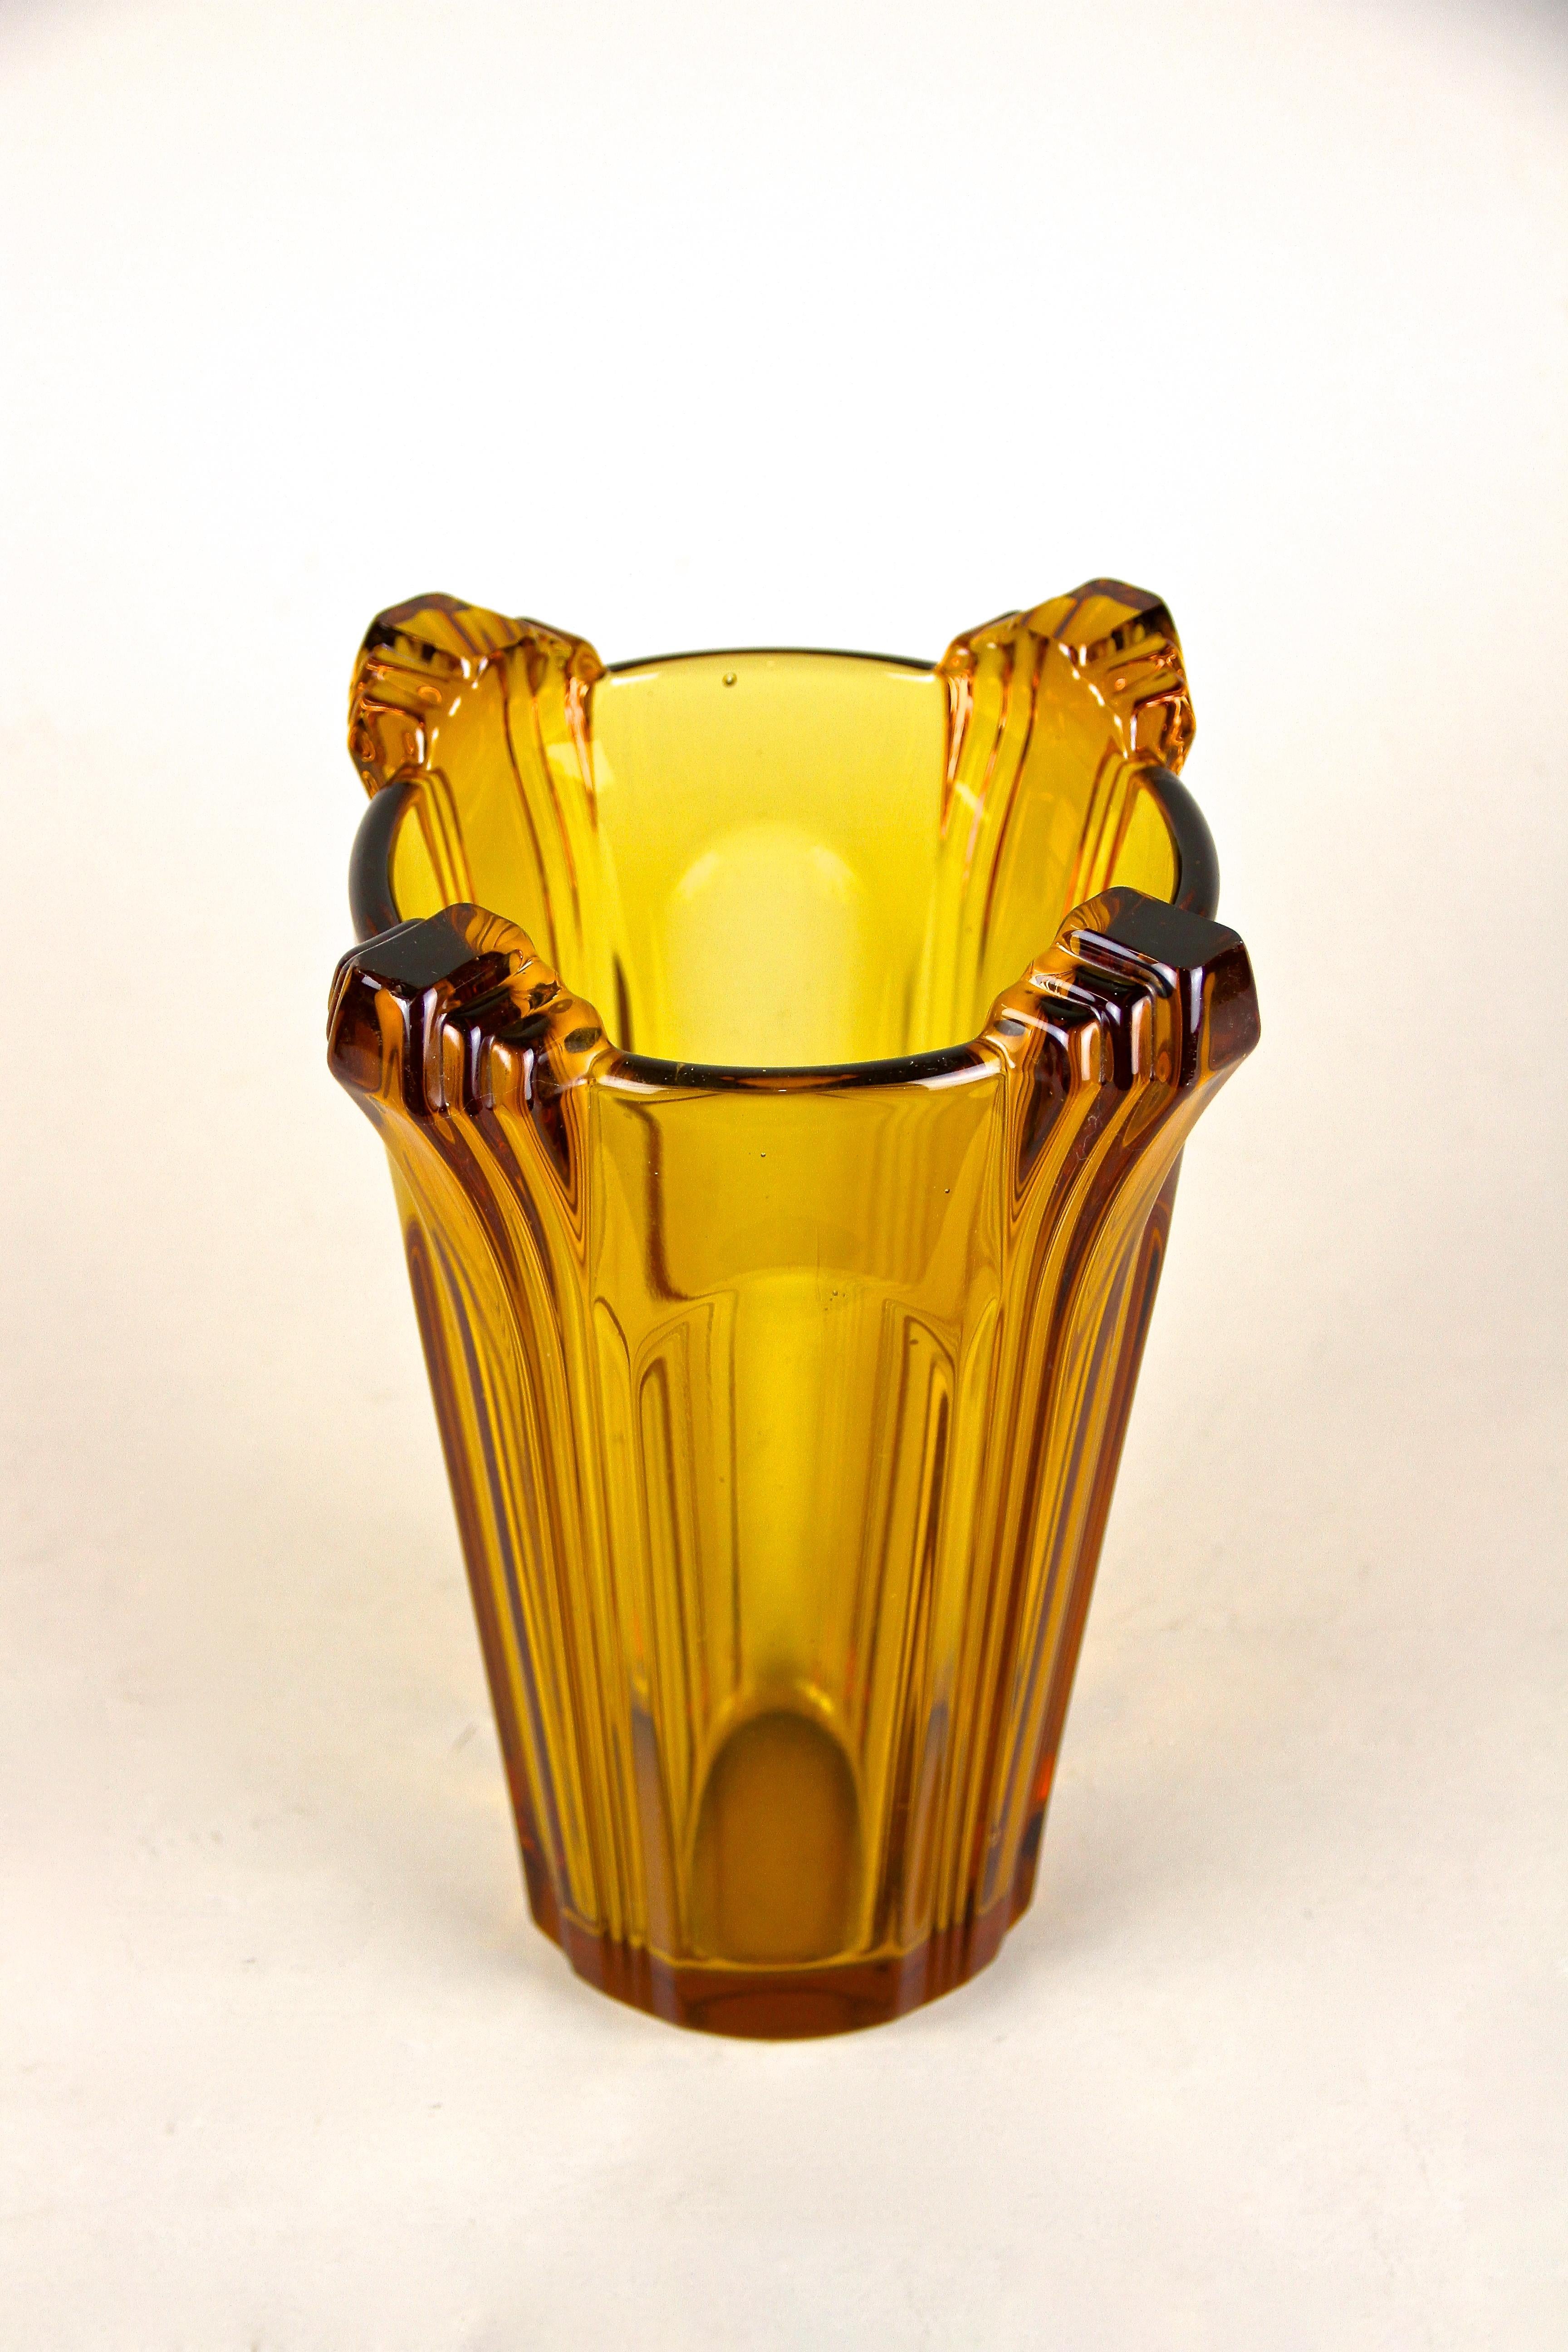 Lovely, amber colored Art Deco Glass Vase from the period circa 1920 in Austria. Showing a beautiful yellow/brown tone, this decorative glass vase impresses with its beautiful shape and shows unique design elements around the upper edge reminding us